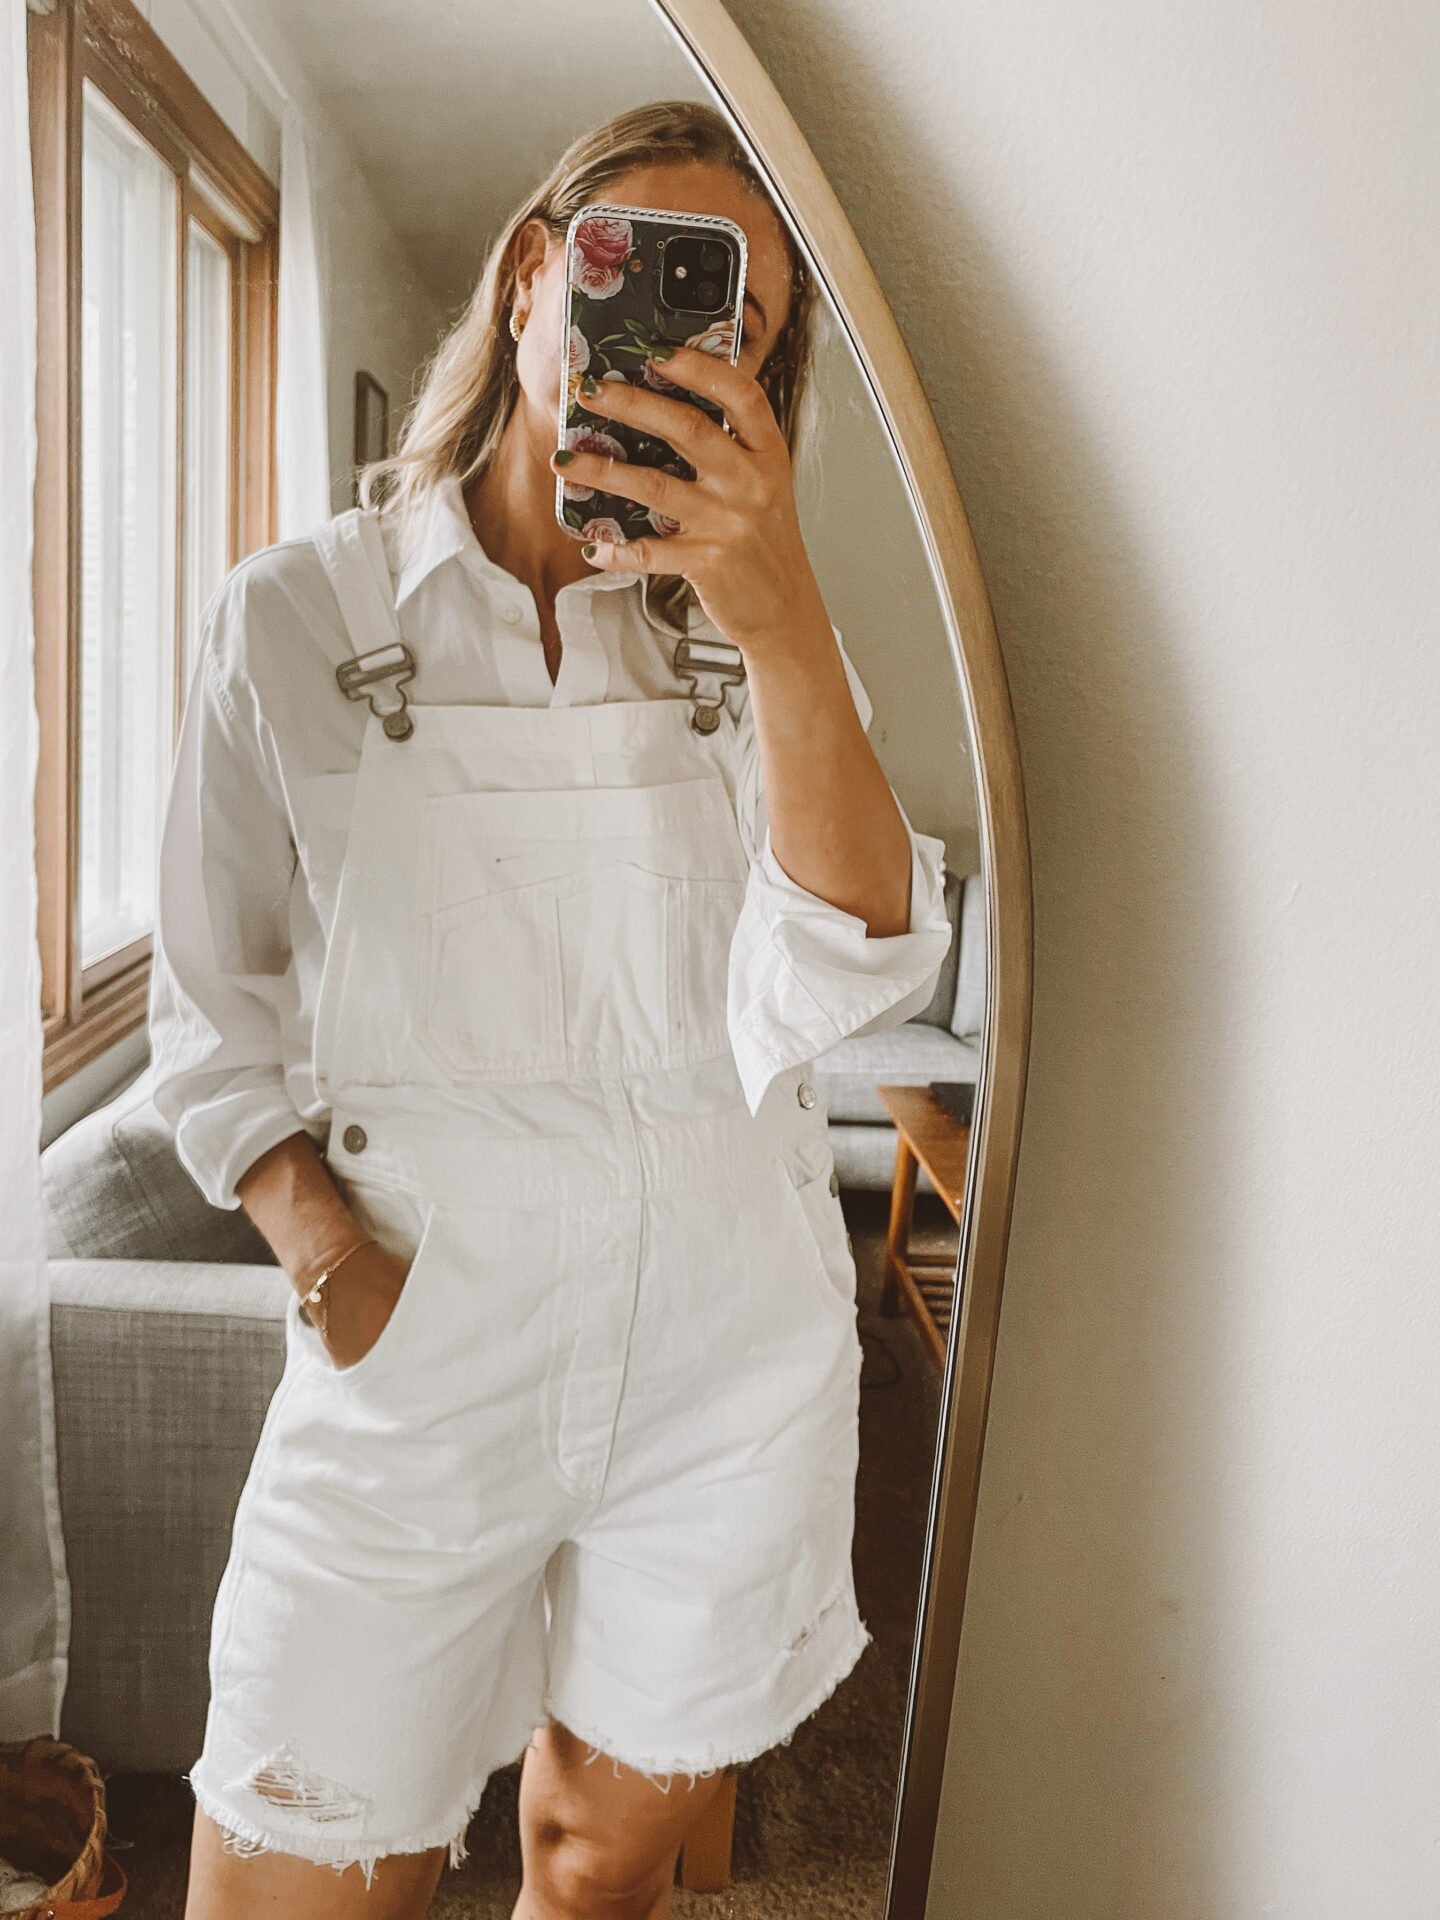 Karin Emily wears a white button down and white overall shorts from the Gap